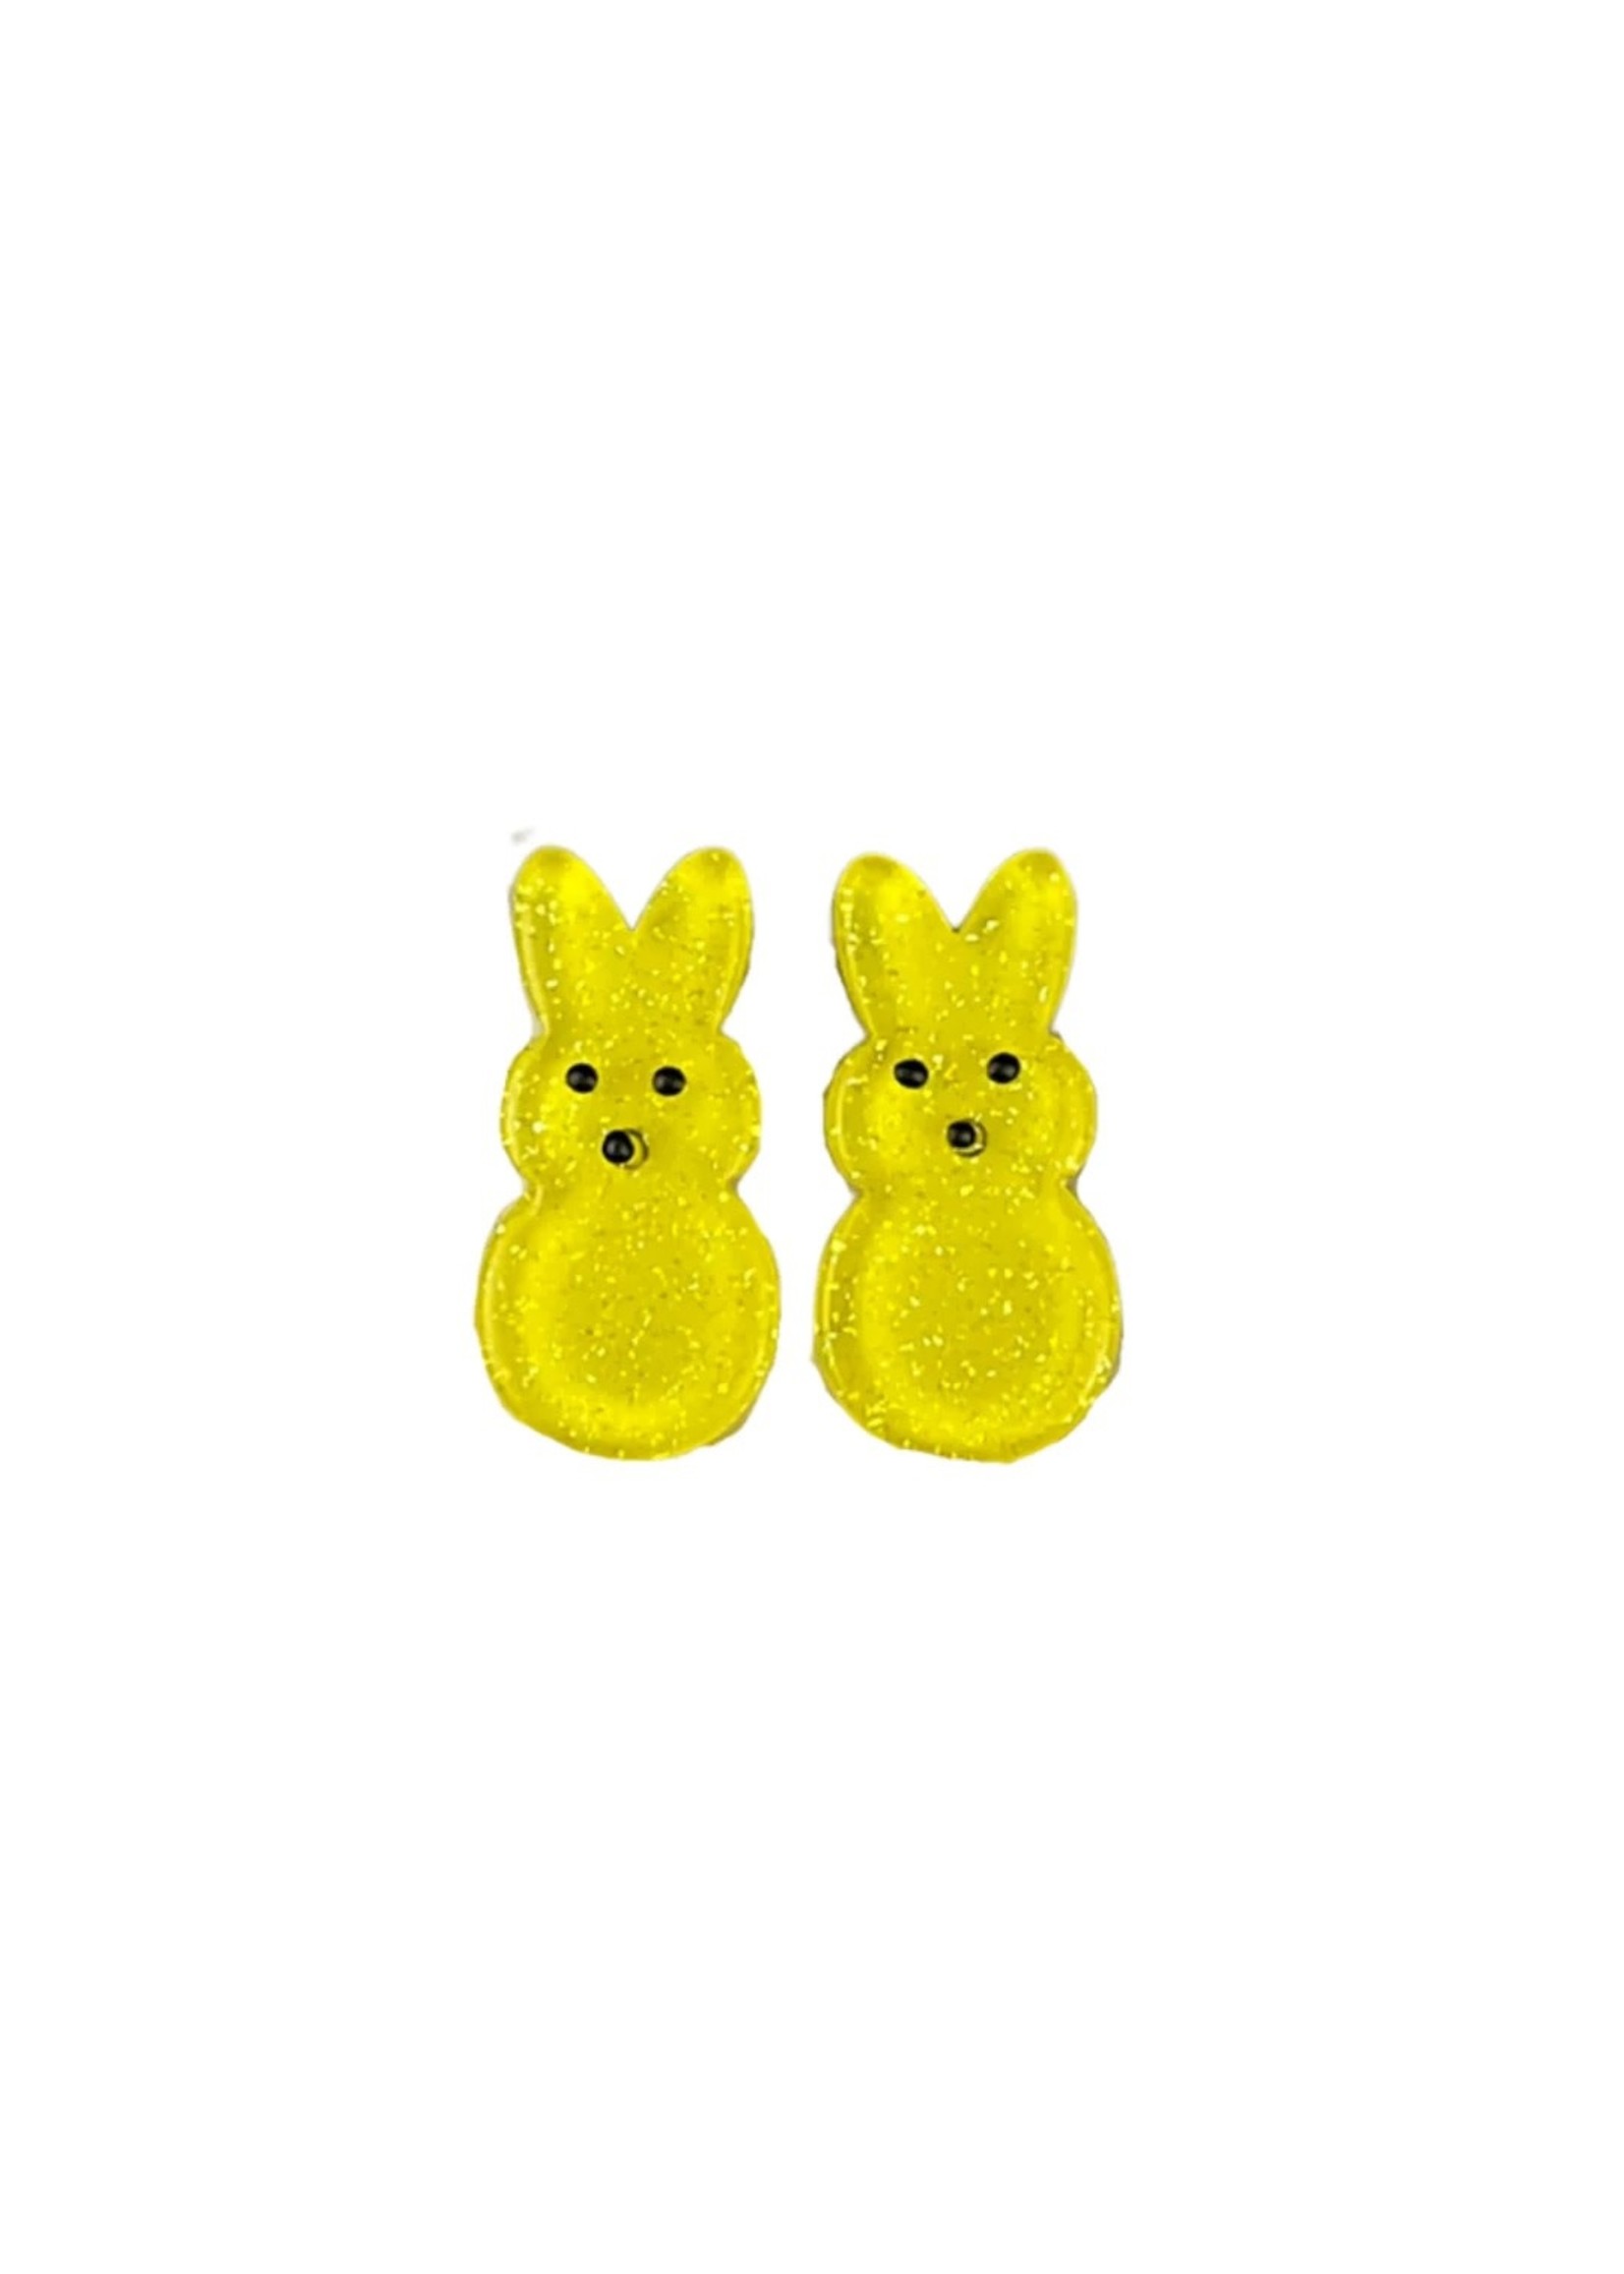 Brianna Cannon EASTER PEEP STUDS - YELLOW